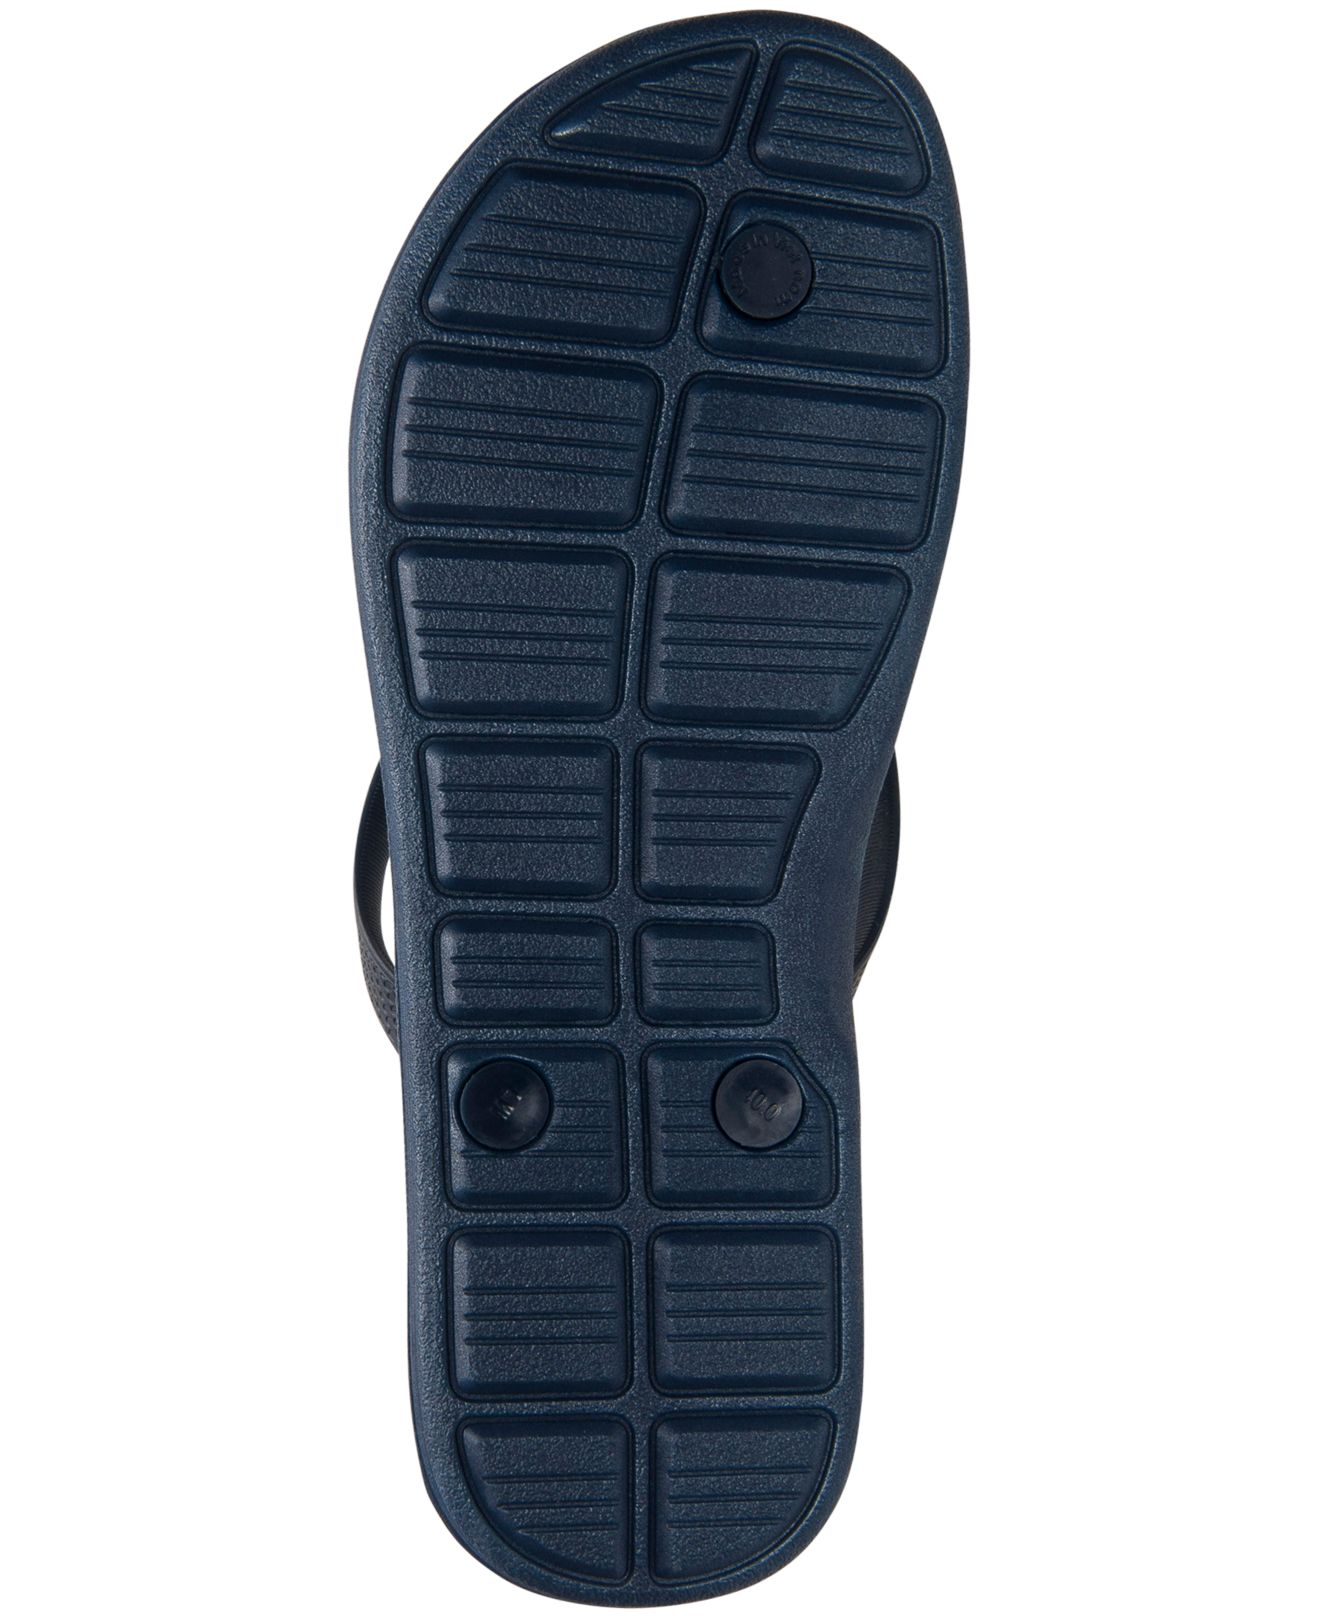 Nike Men's Solarsoft Thong Ii Sandals From Finish Line in Midnight  Navy/Cool Grey/w (Blue) for Men - Lyst